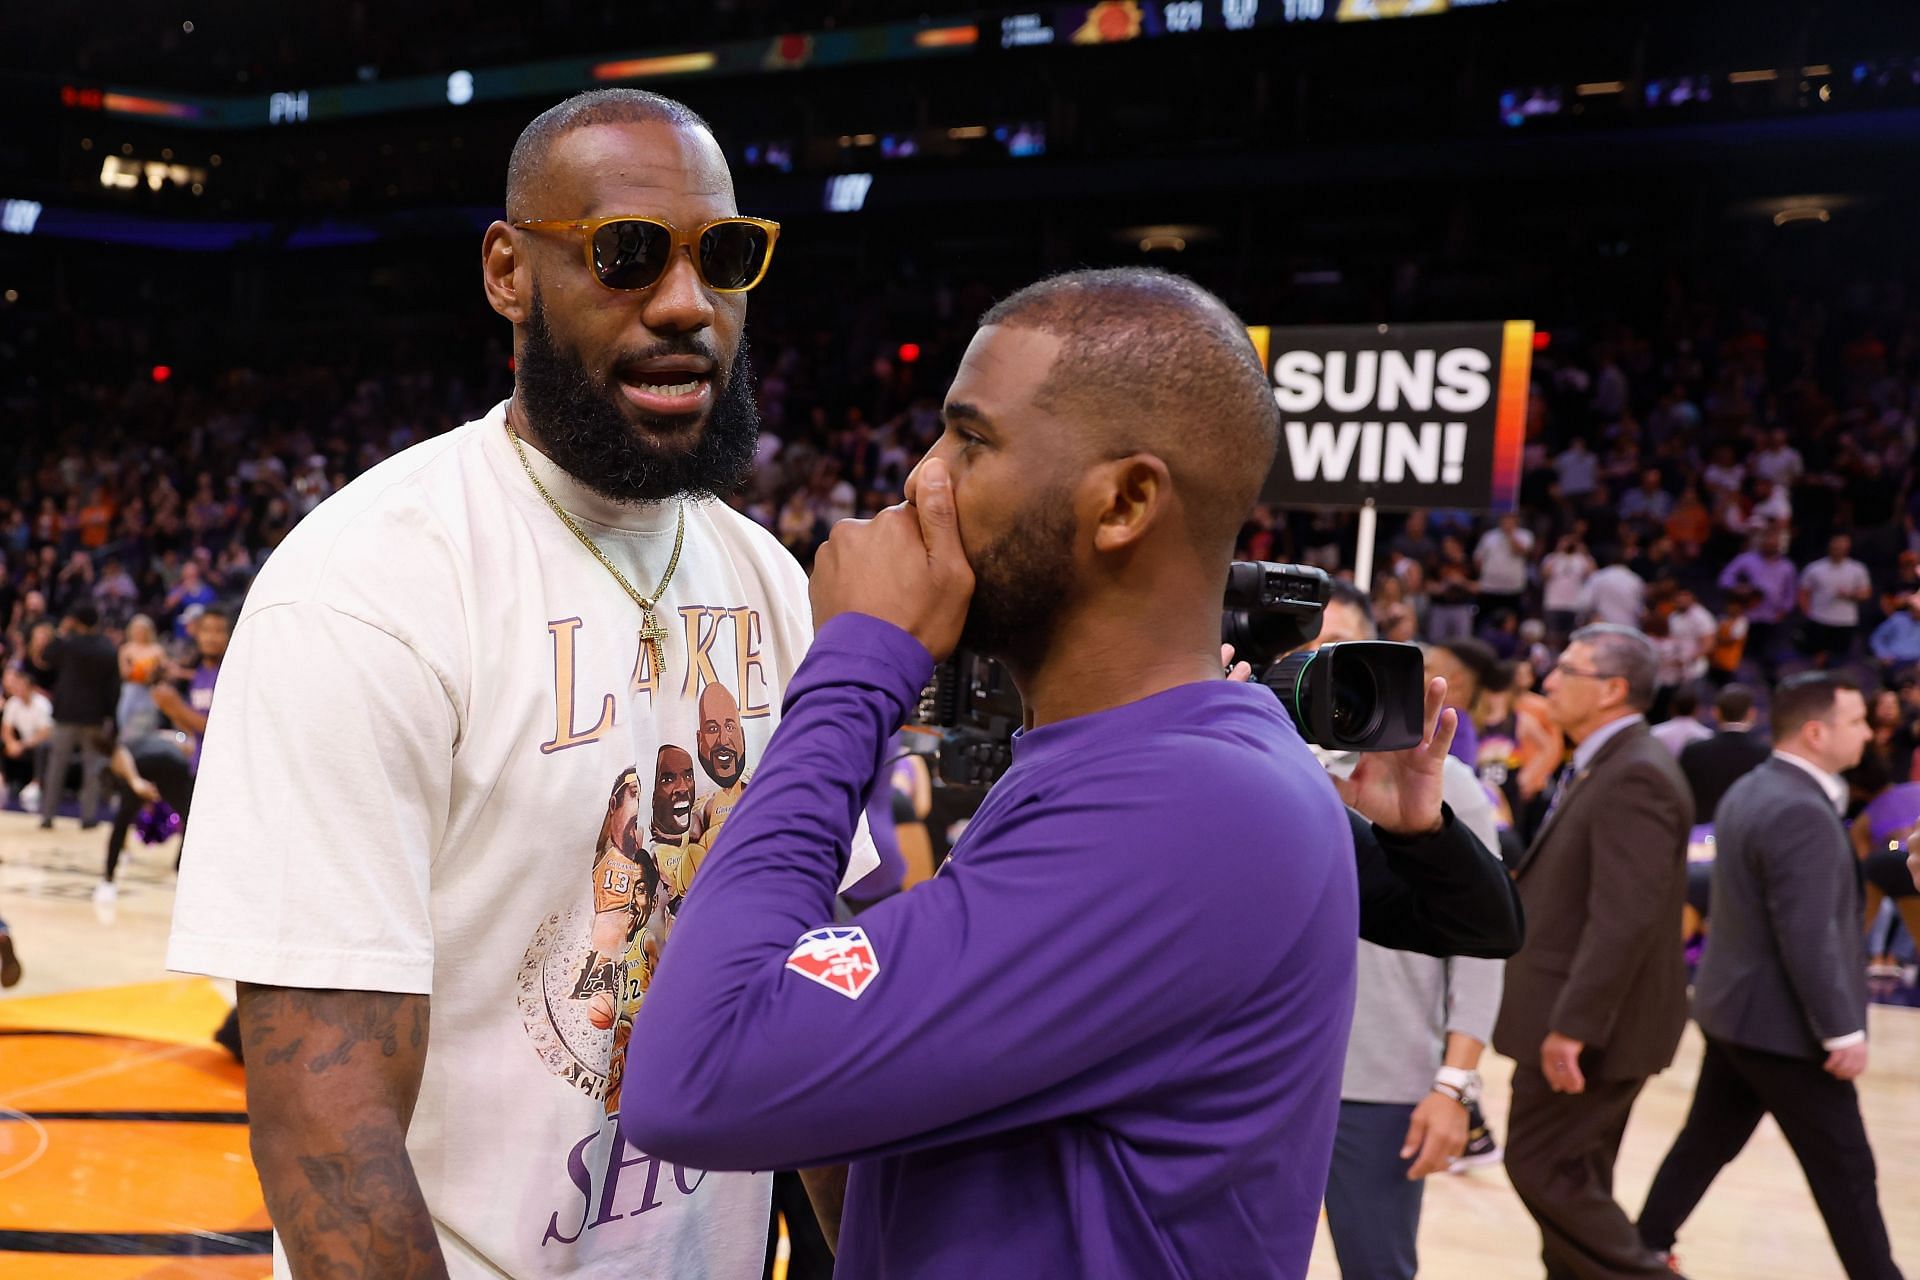 LeBron James (left) of the LA Lakers talks with Chris Paul of the Phoenix Suns following an NBA game on April 05, 2022, in Phoenix, Arizona.